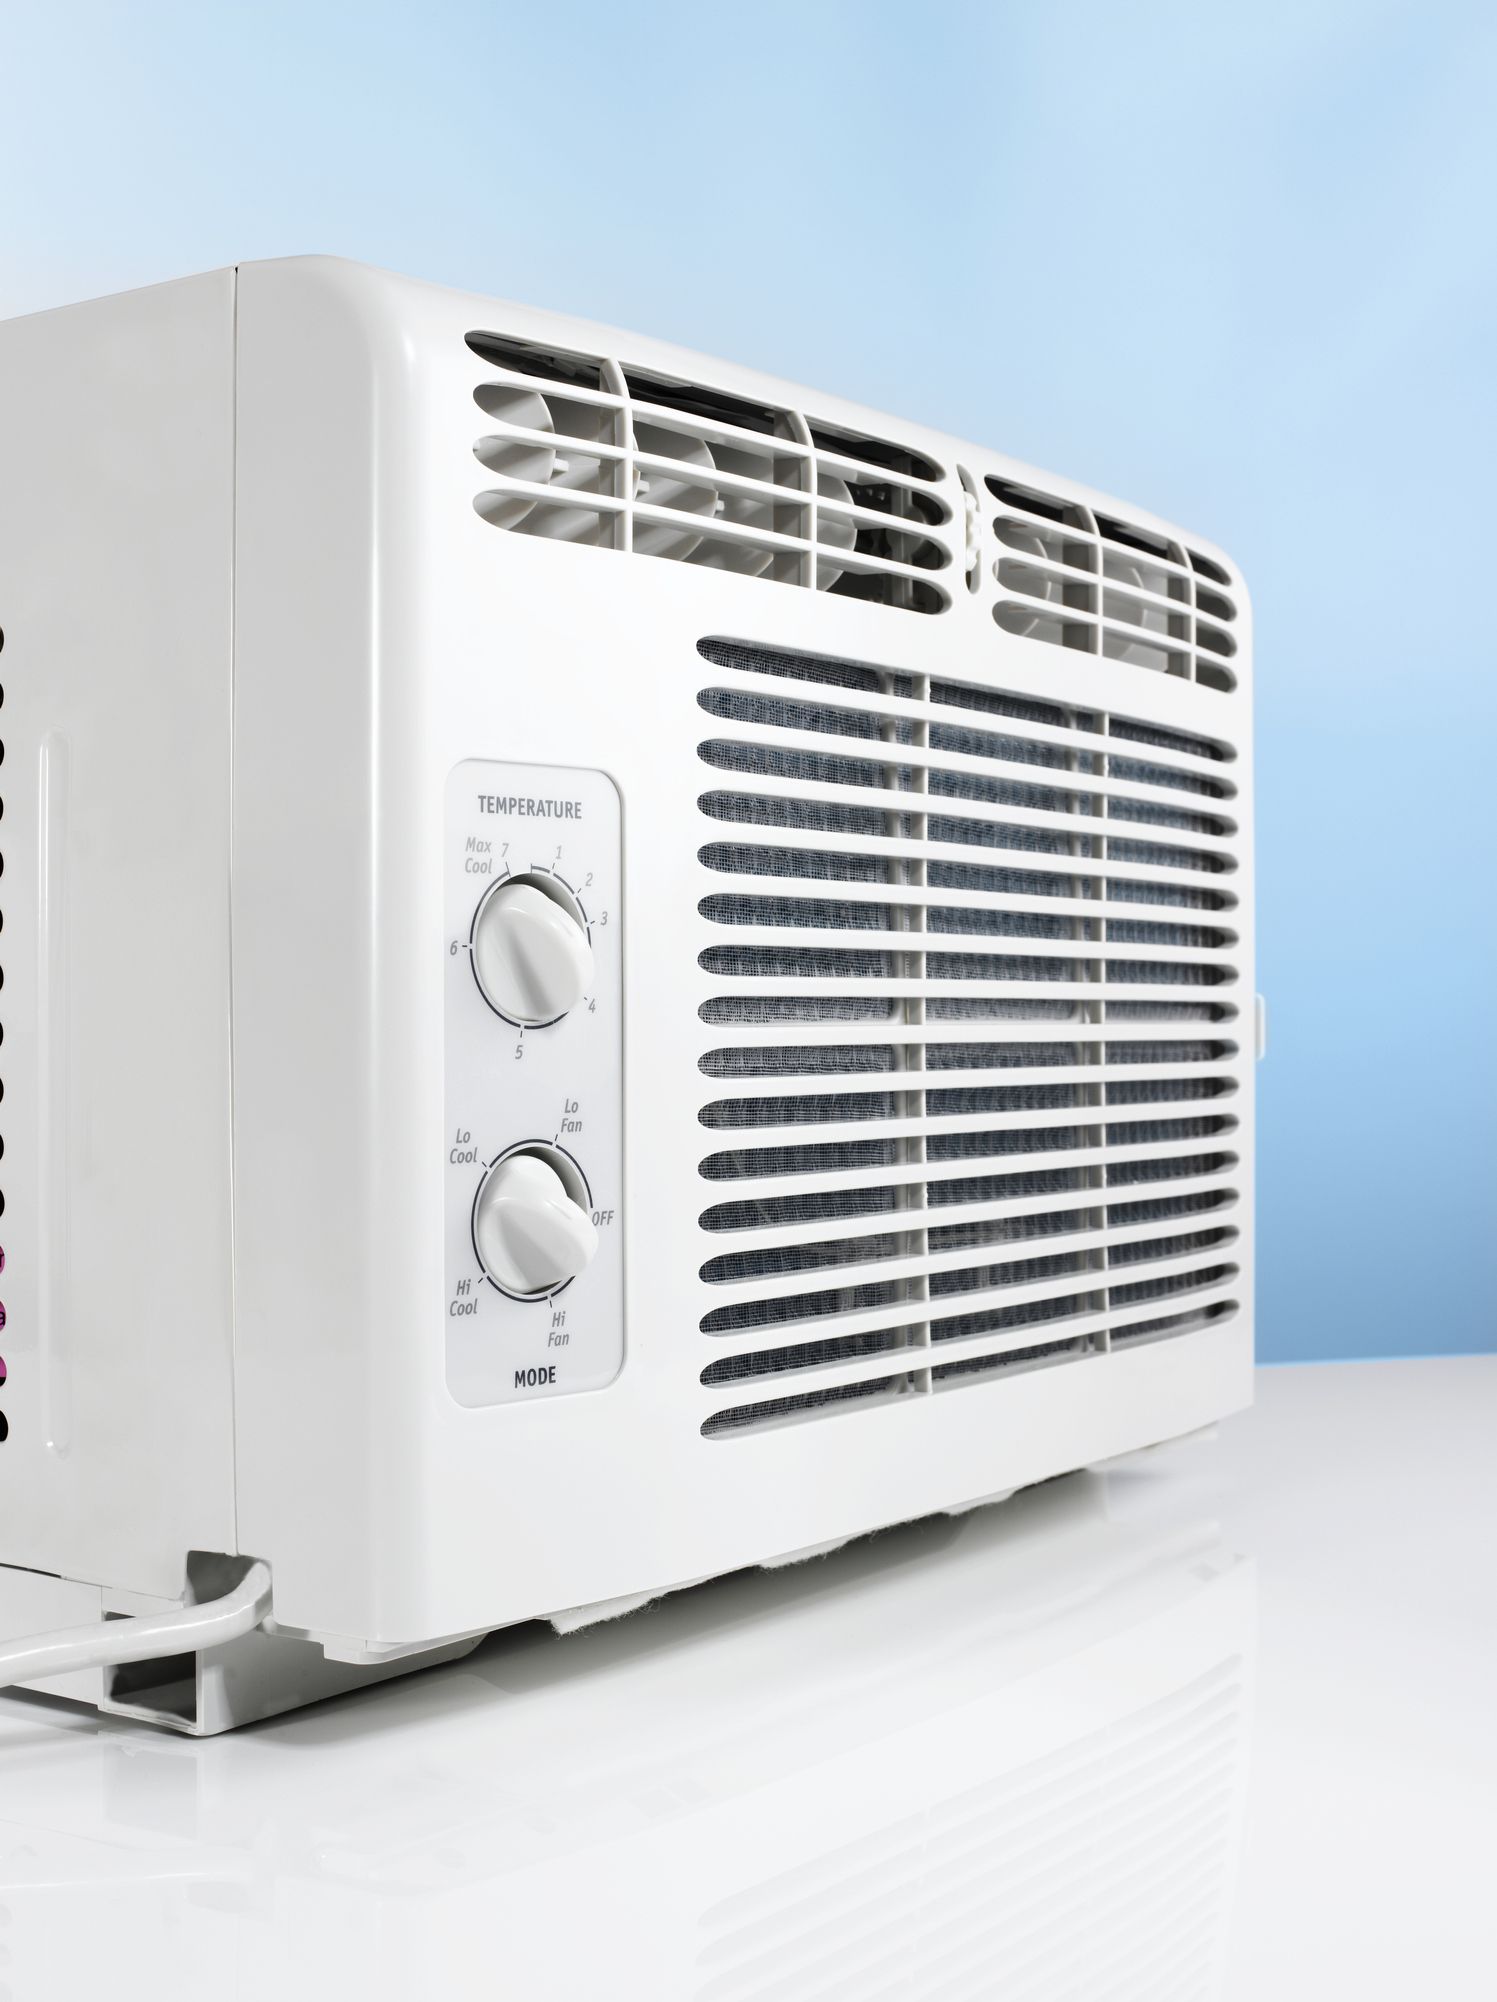 Product, Home appliance, Technology, Electronic device, Air conditioning, Heat, Small appliance, 